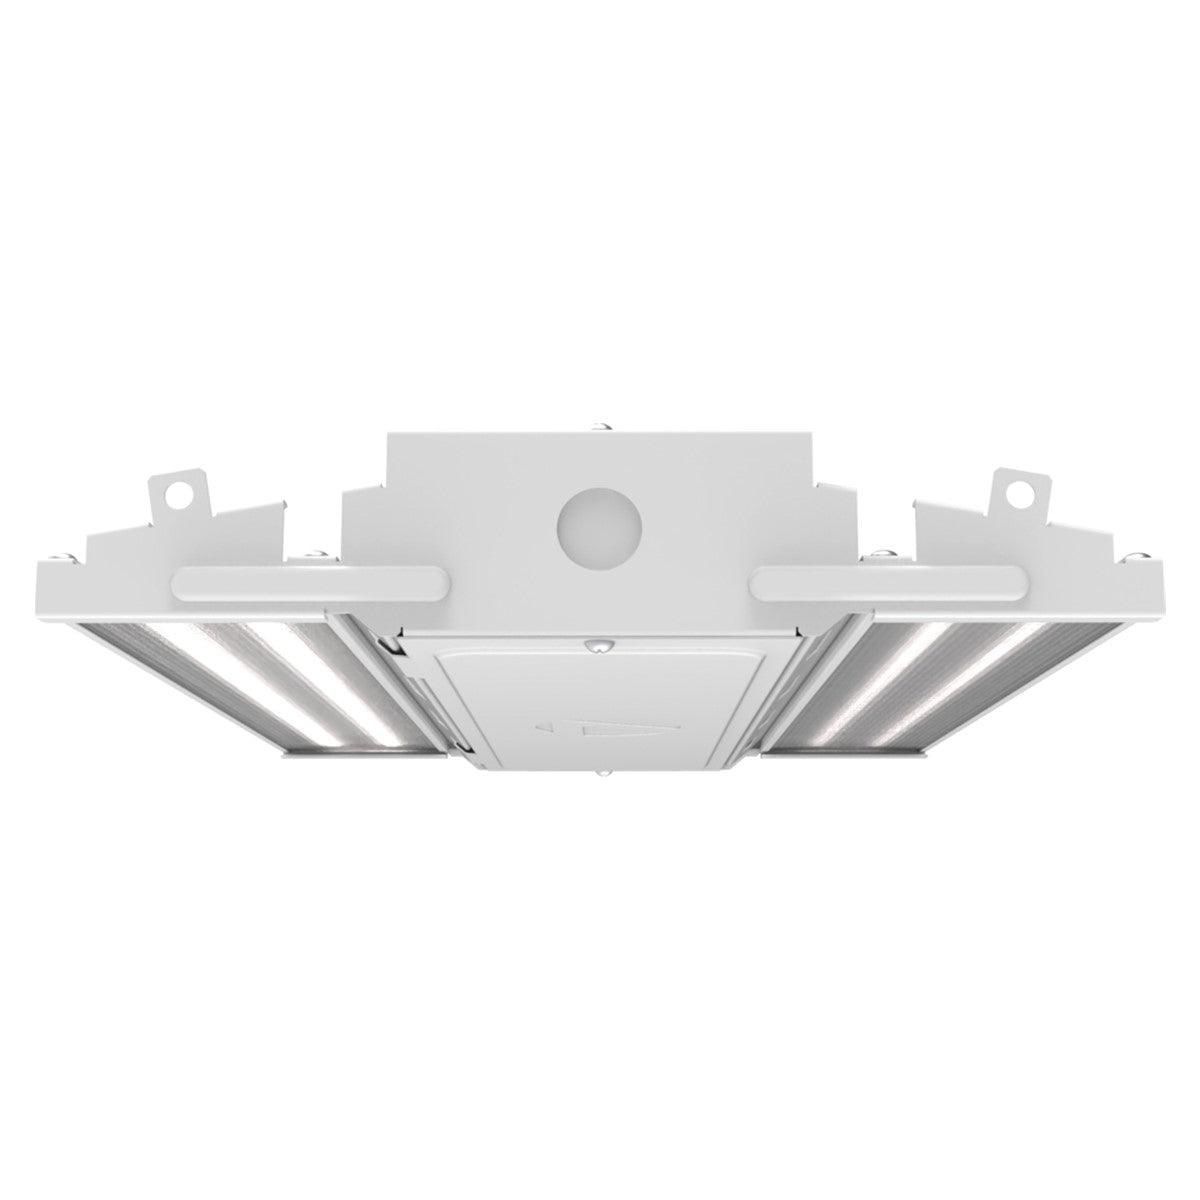 Compact Pro LED High Bay, Switchable Lumens 24000/30000 and CCT 4000K/5000K, 120/277V